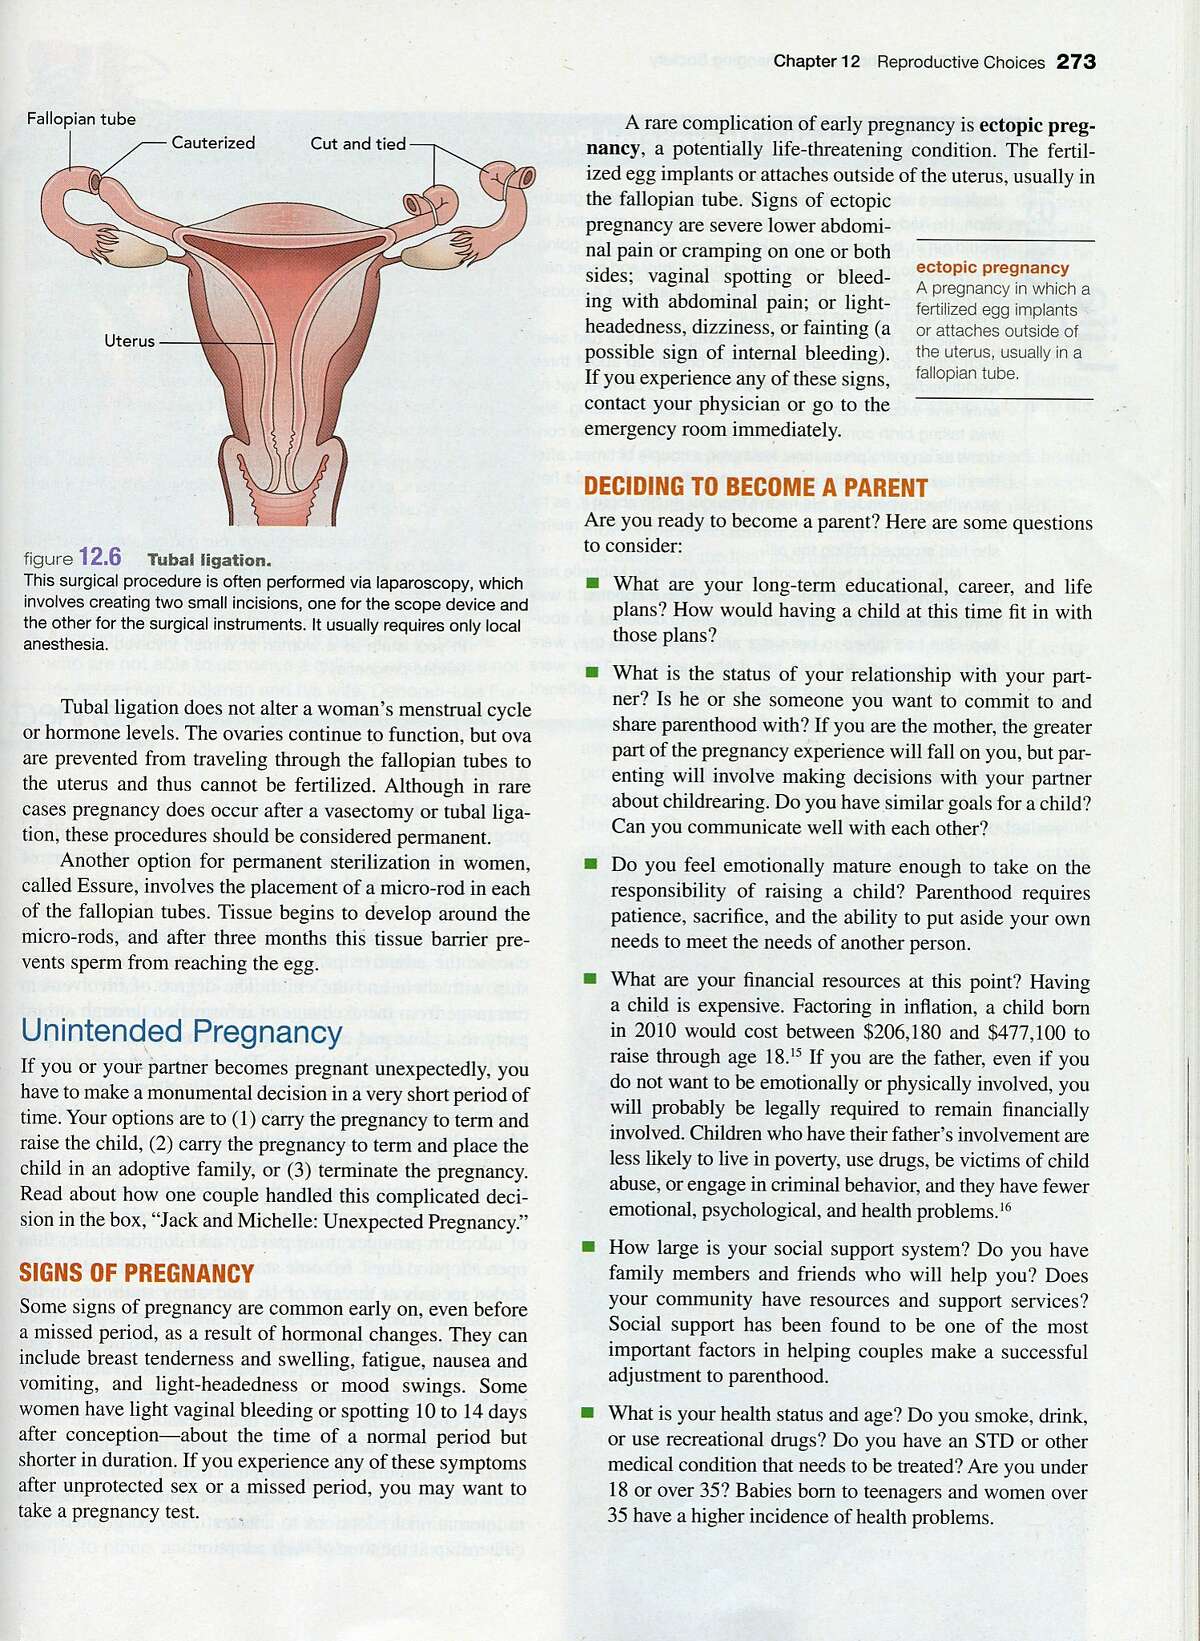 An example page from the textbook "Your Health Today" published by McGraw Hill. The book is causing controversy among parents in the Fremont Unified School District, where it is slated to be taught to their ninth-grade students. The parents say the book's diagrams and explicit descriptions are inappropriate for high school students. View Larger Image